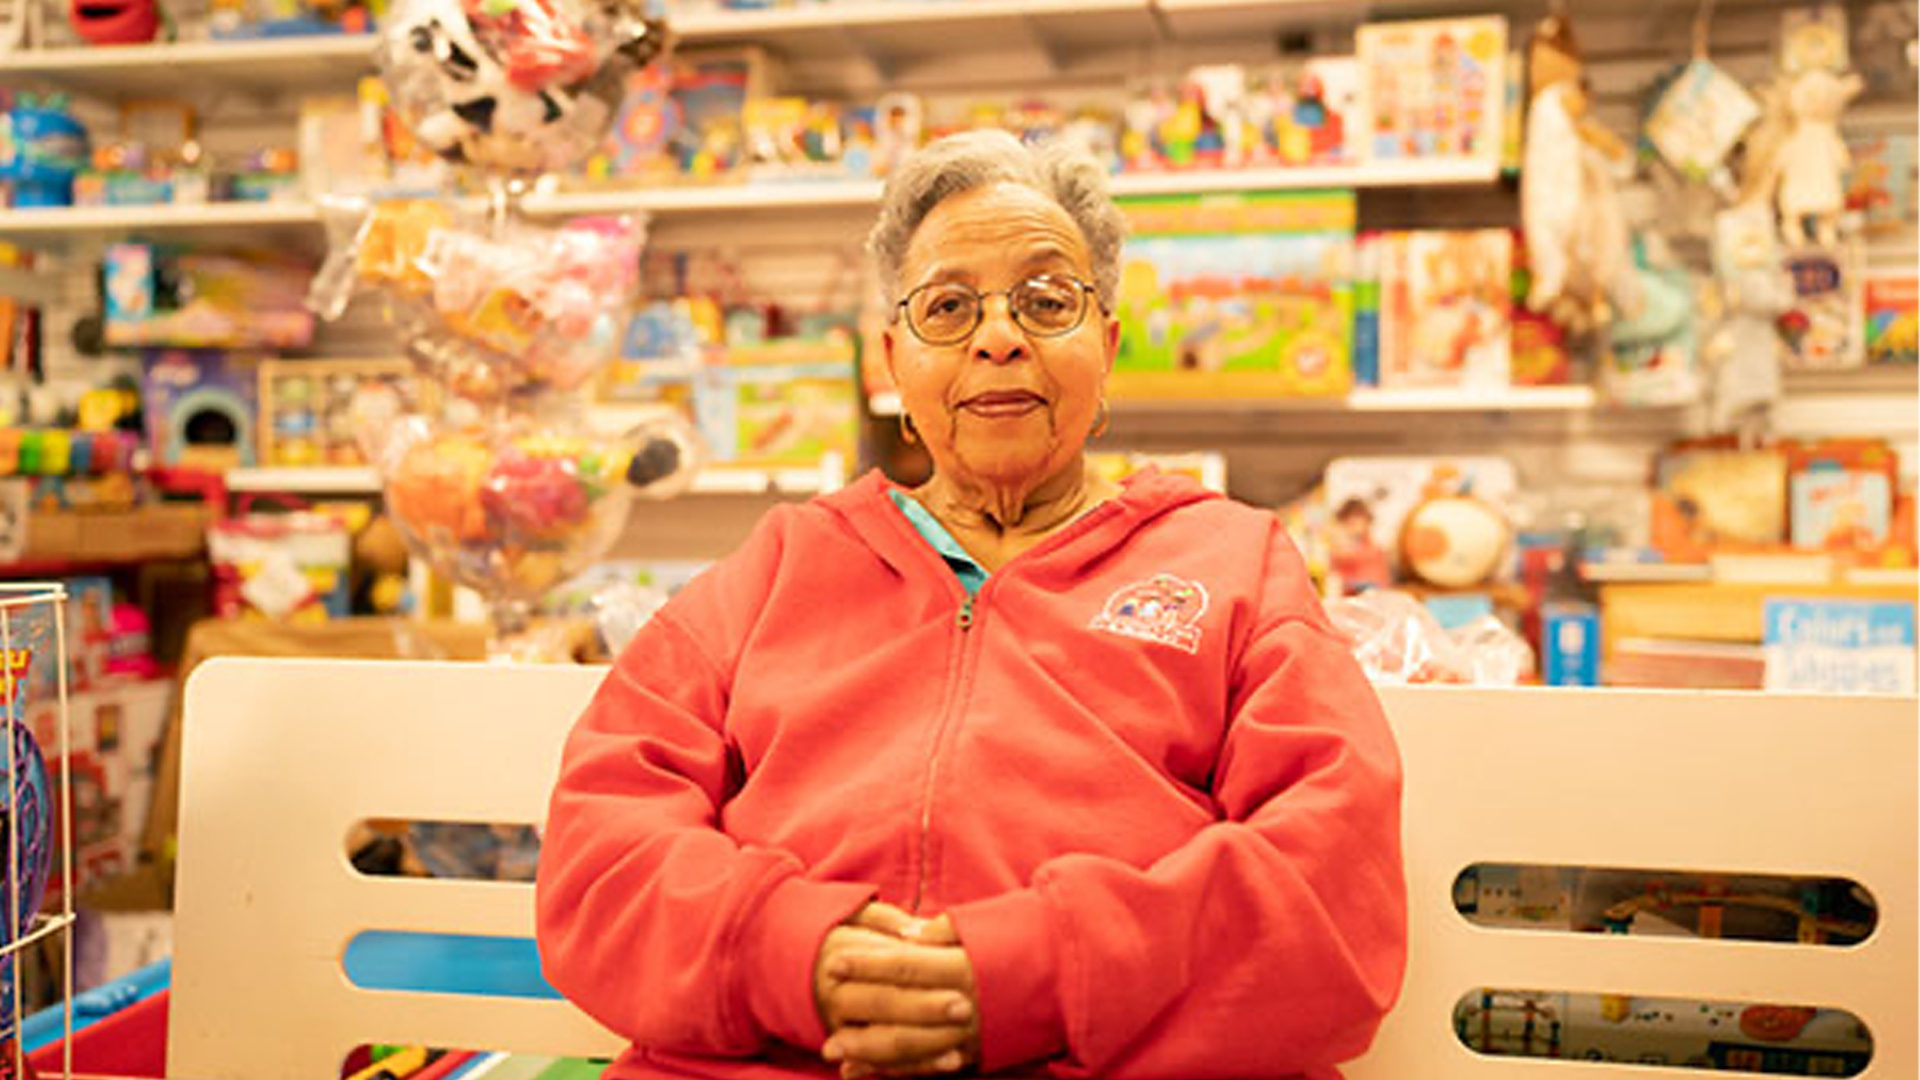 Mastercard Honors Harlem's Iconic 'Grandma's Place' In New Campaign Featuring Small Businesses